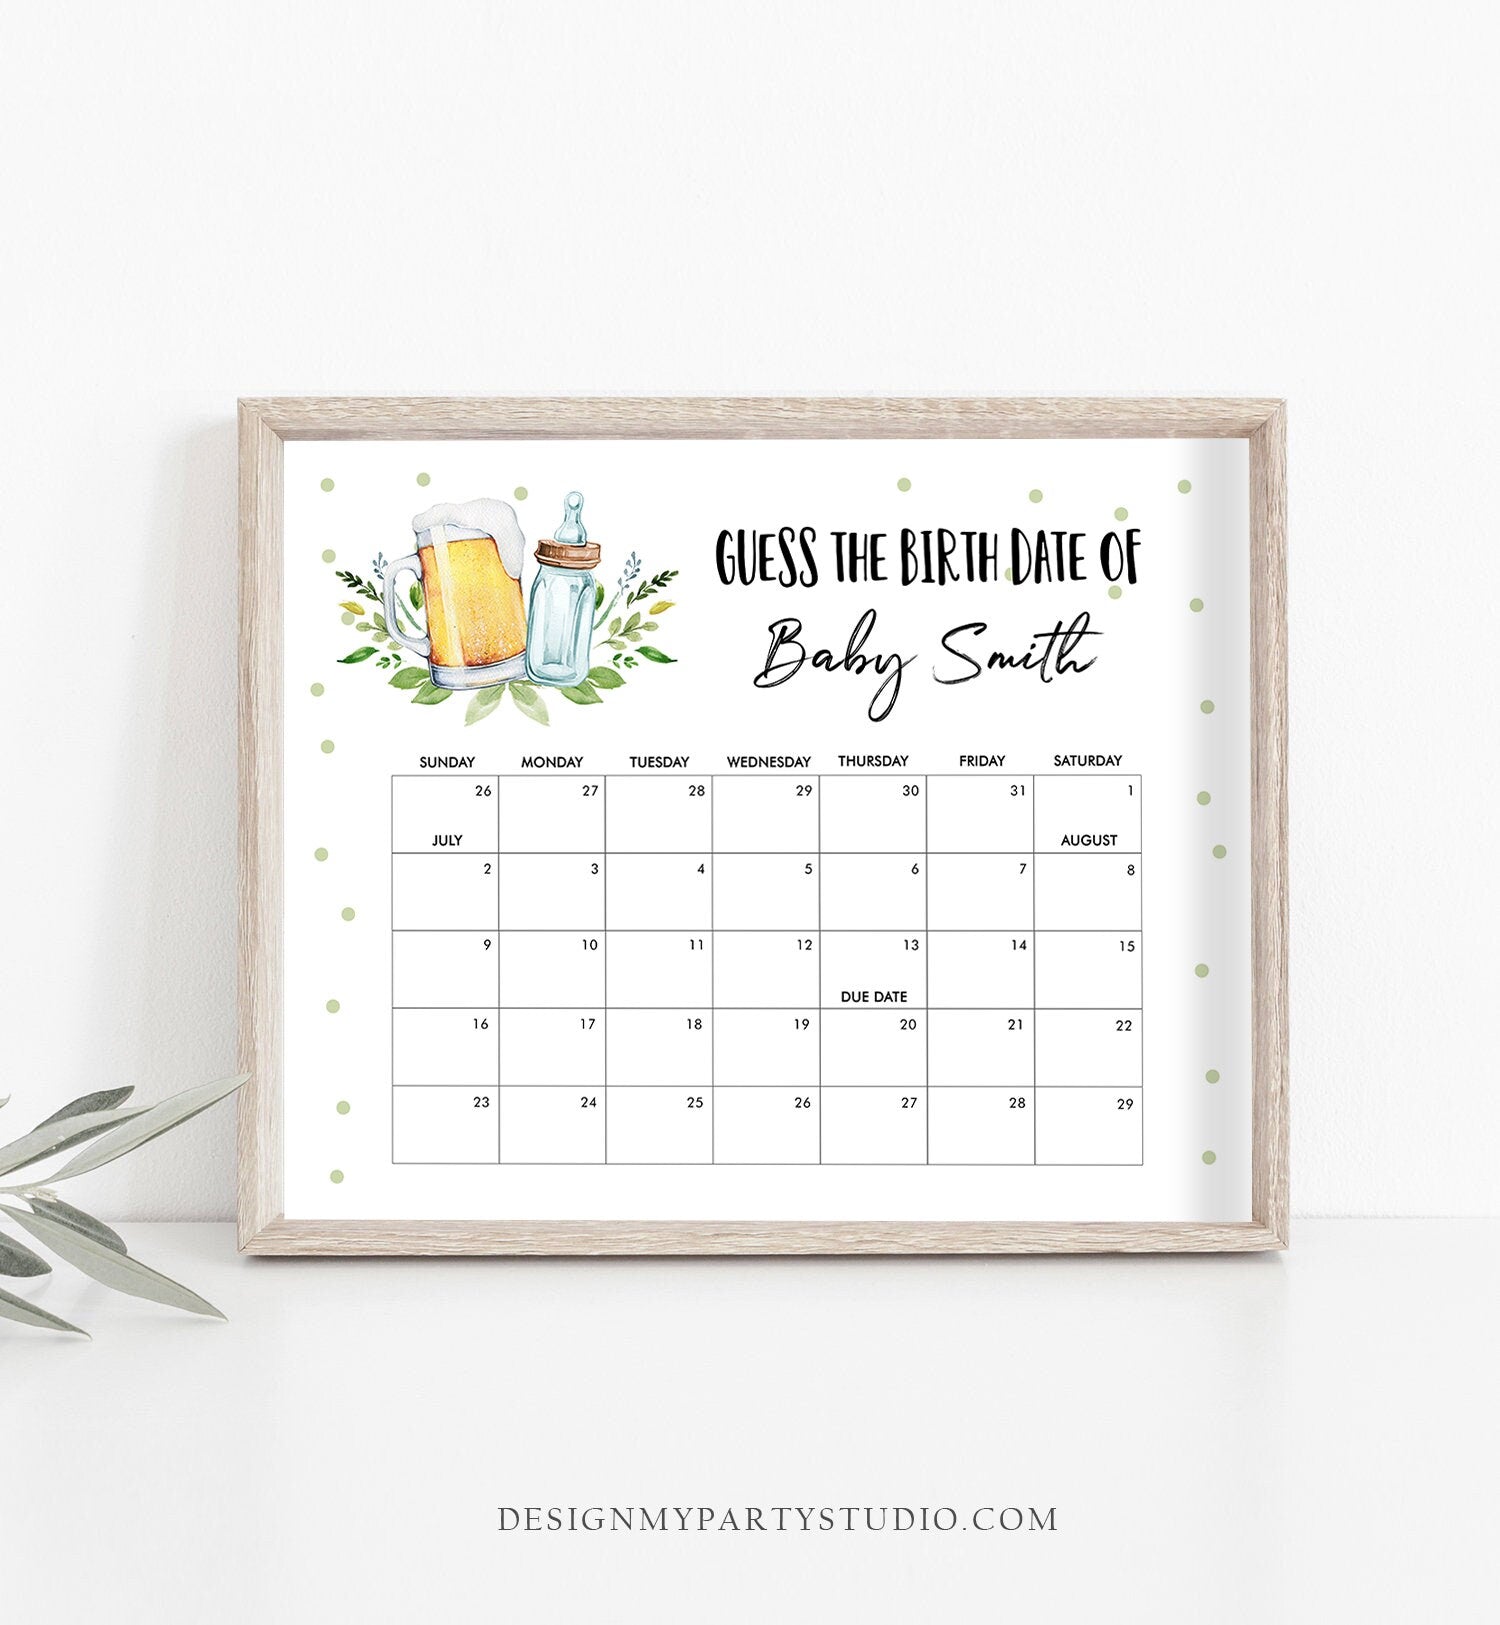 Editable Guess the Birth Date Baby Shower Game Guess Birthday Baby is Brewing Baby Shower Beers and Bottles Corjl Template Printable 0190